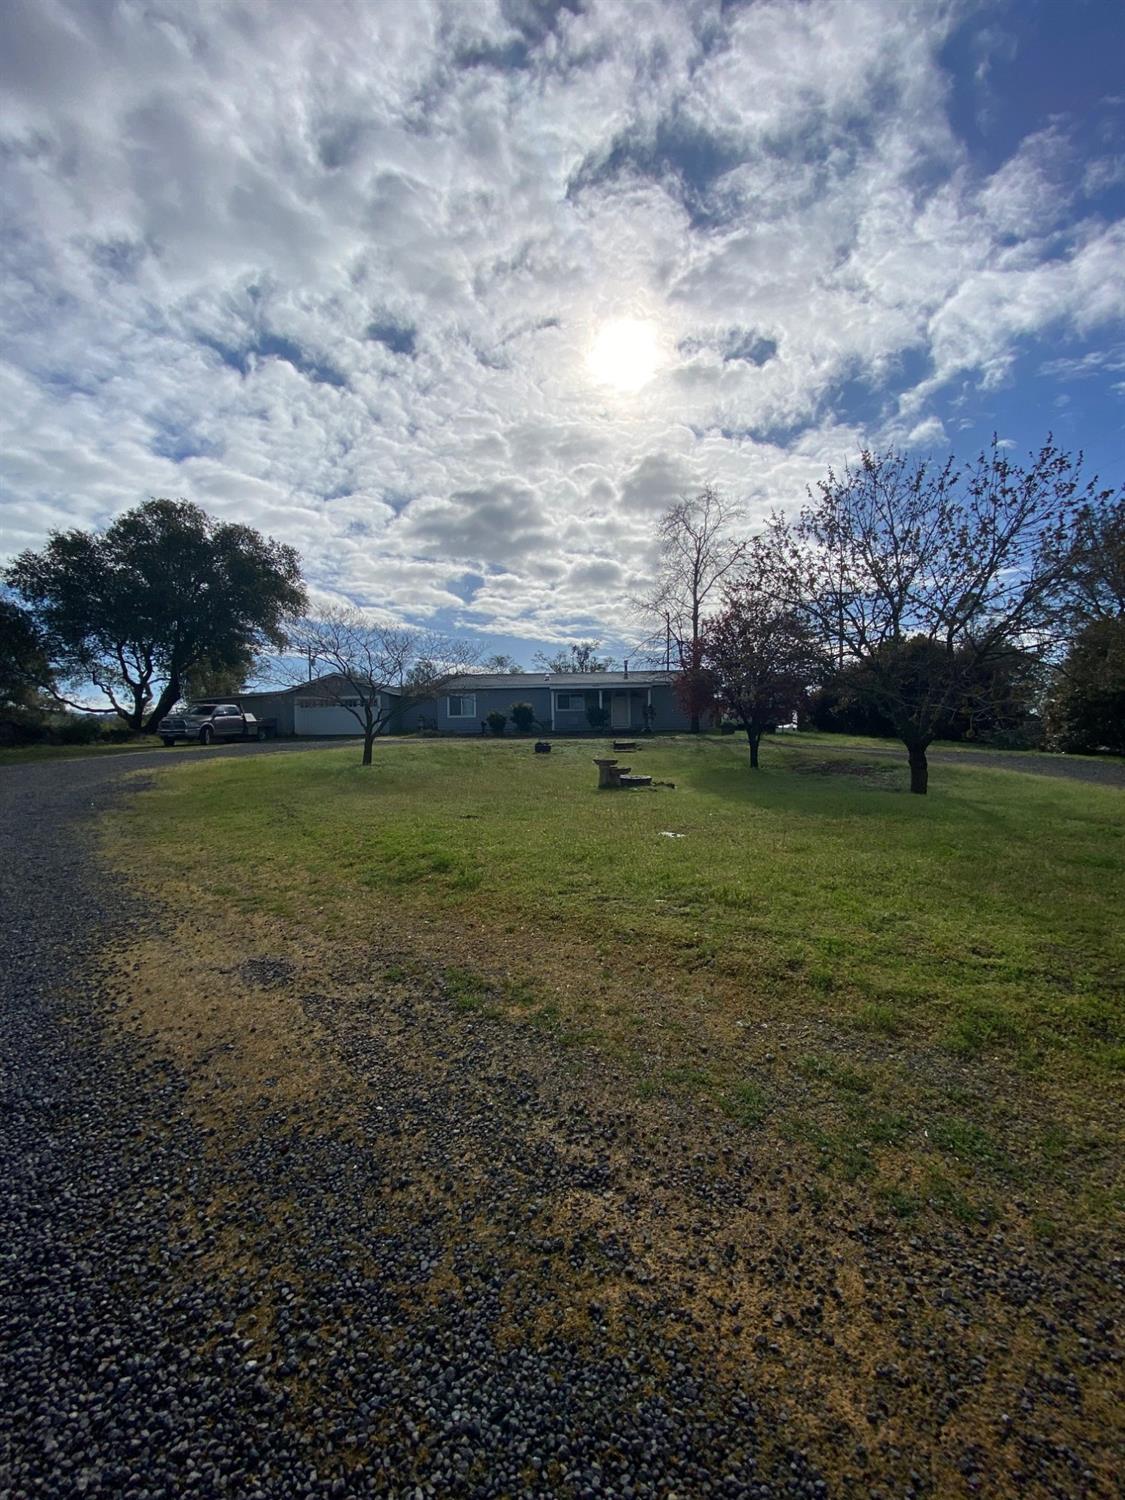 Photo of 2604 Choctaw Rd in Copperopolis, CA